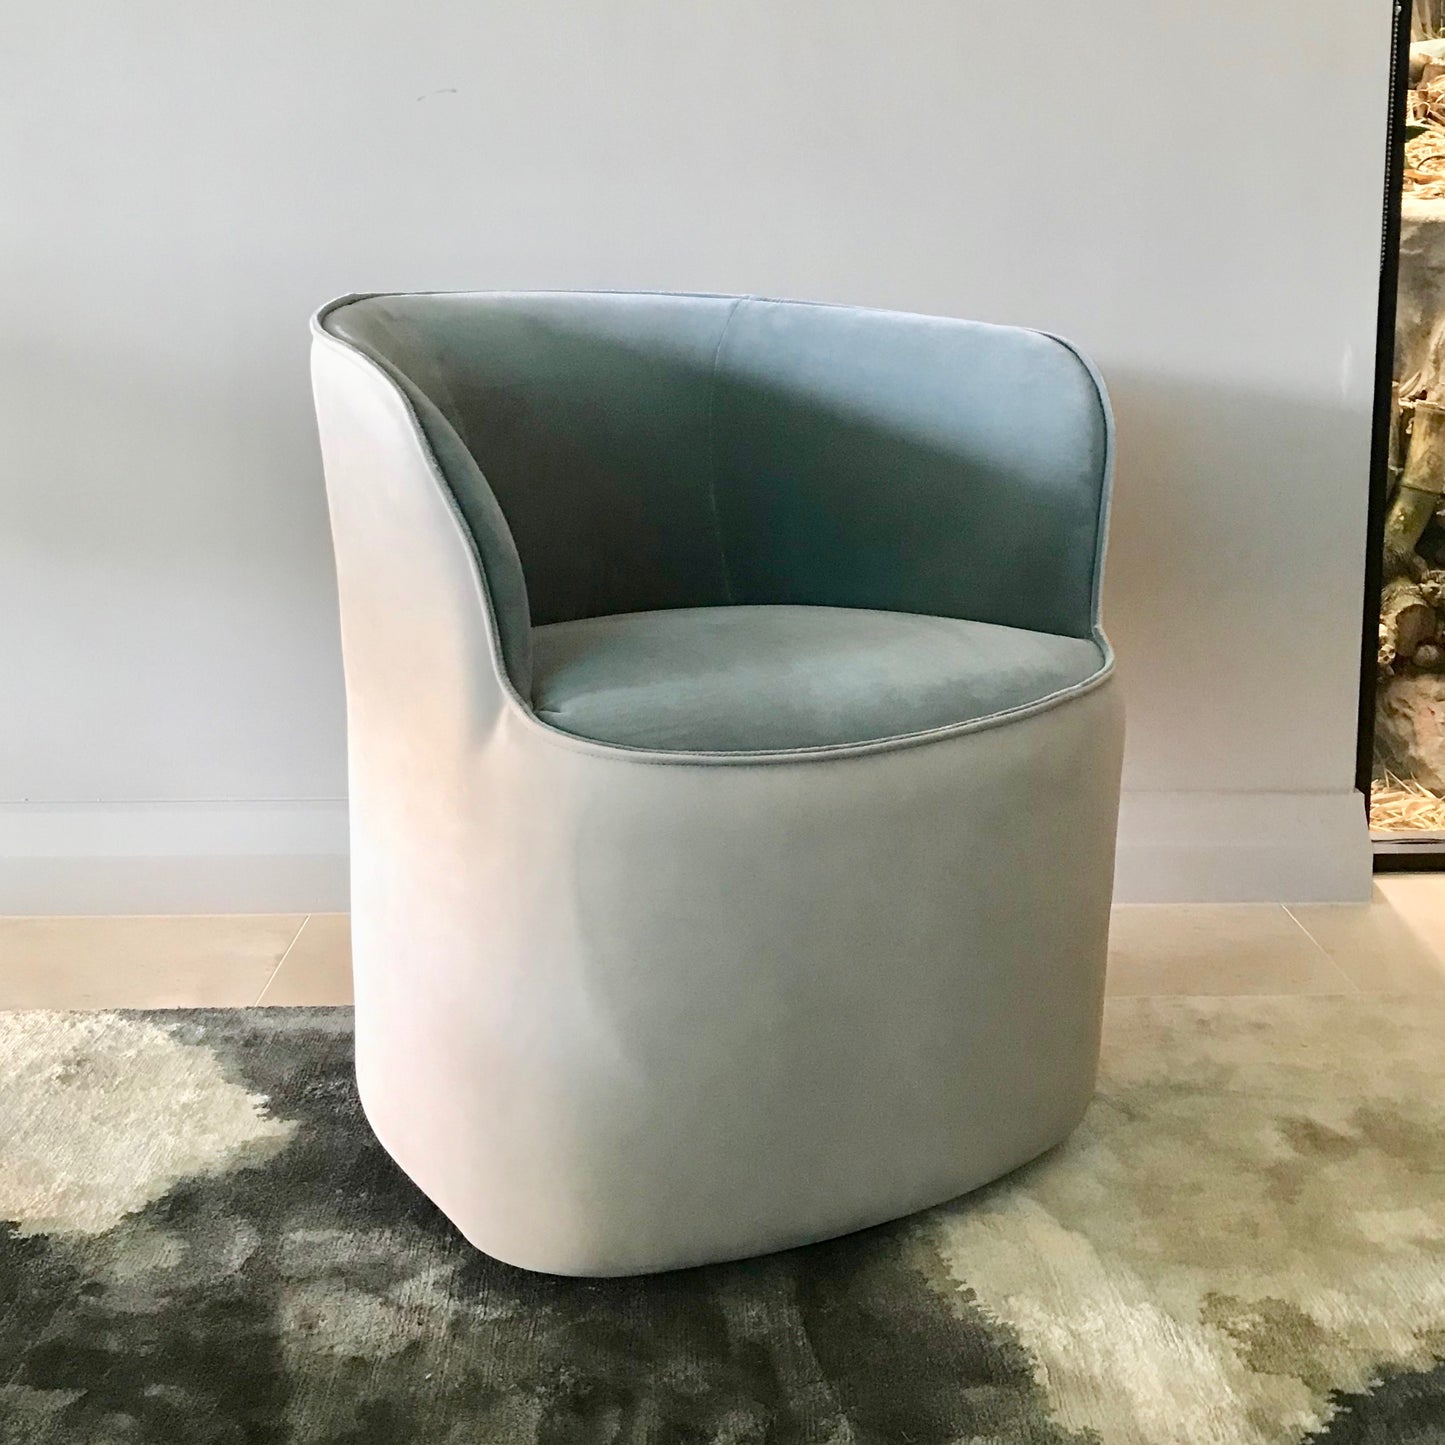 Pearl Swivel Armchair by Jardan (2 available)